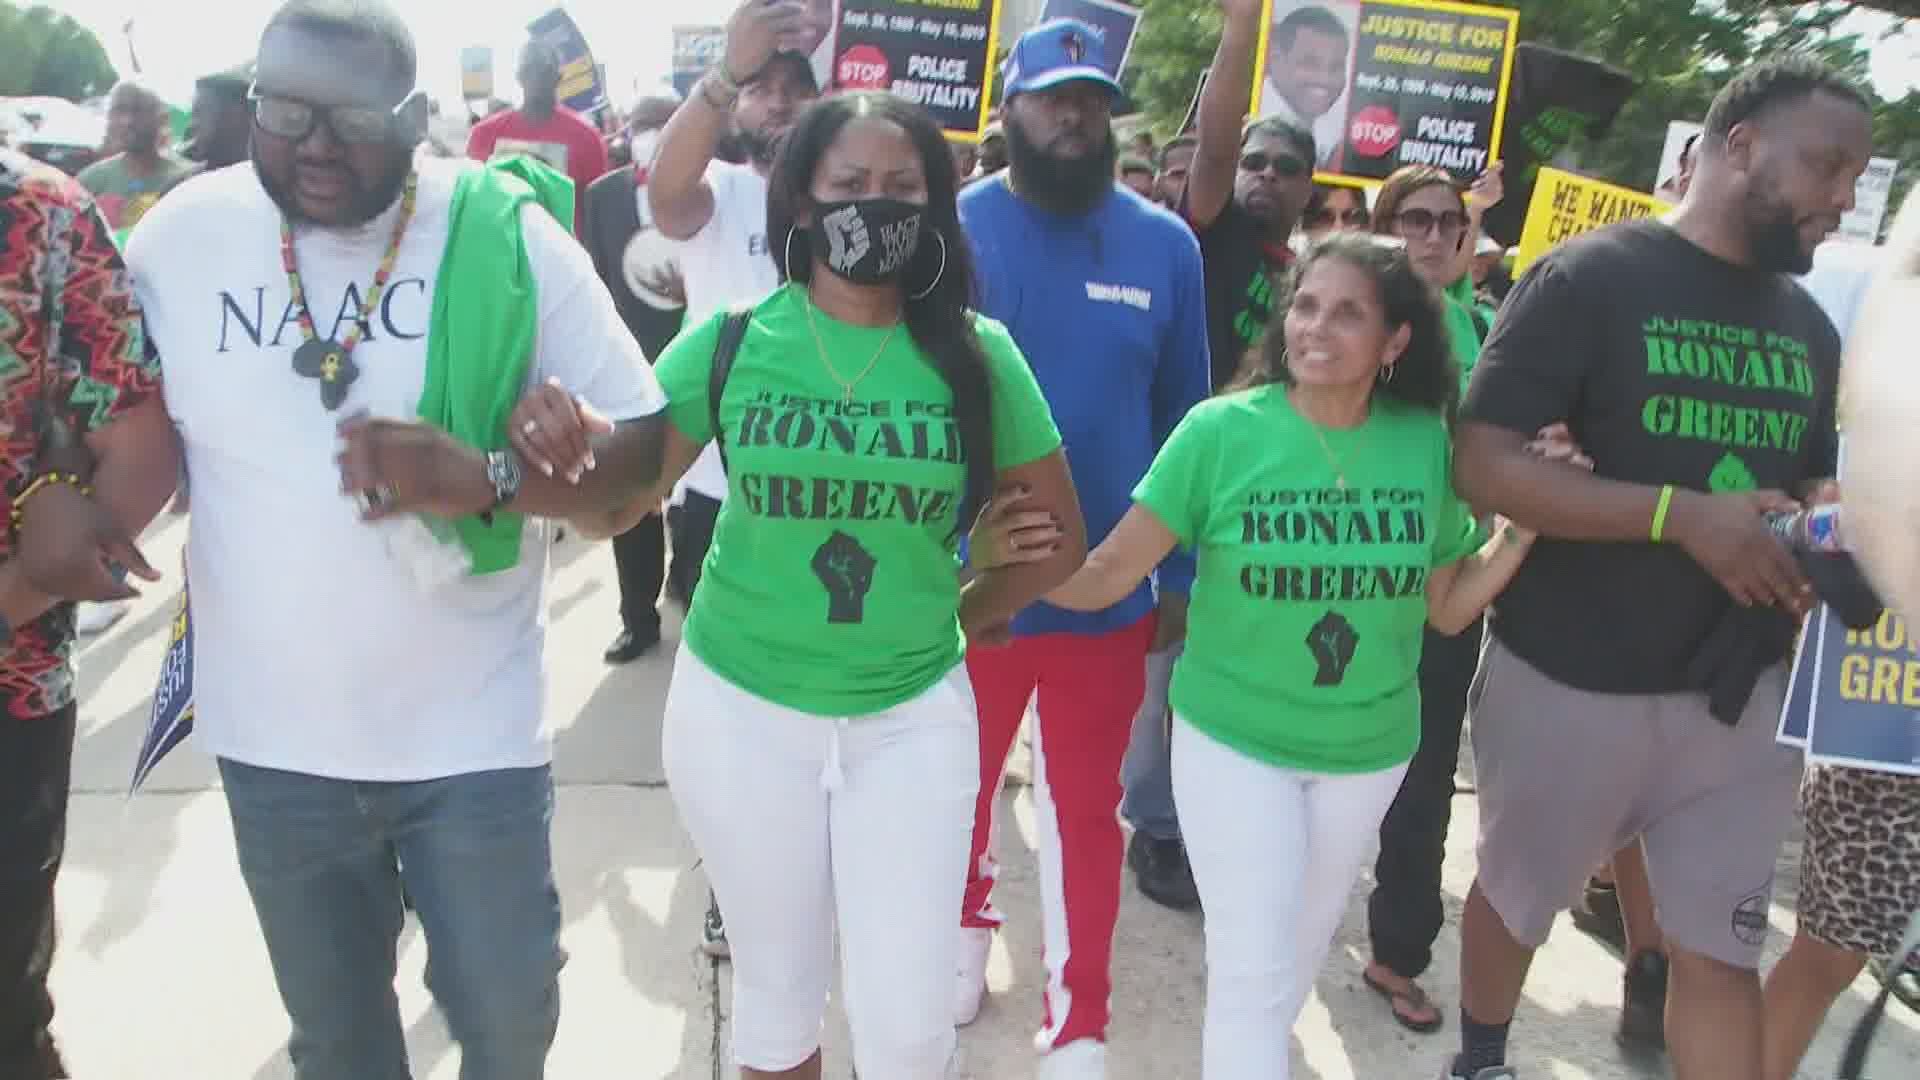 The mother of Ronald Greene led protestors on a march for justice in the arrest and death of her son by LSP back in 2019.